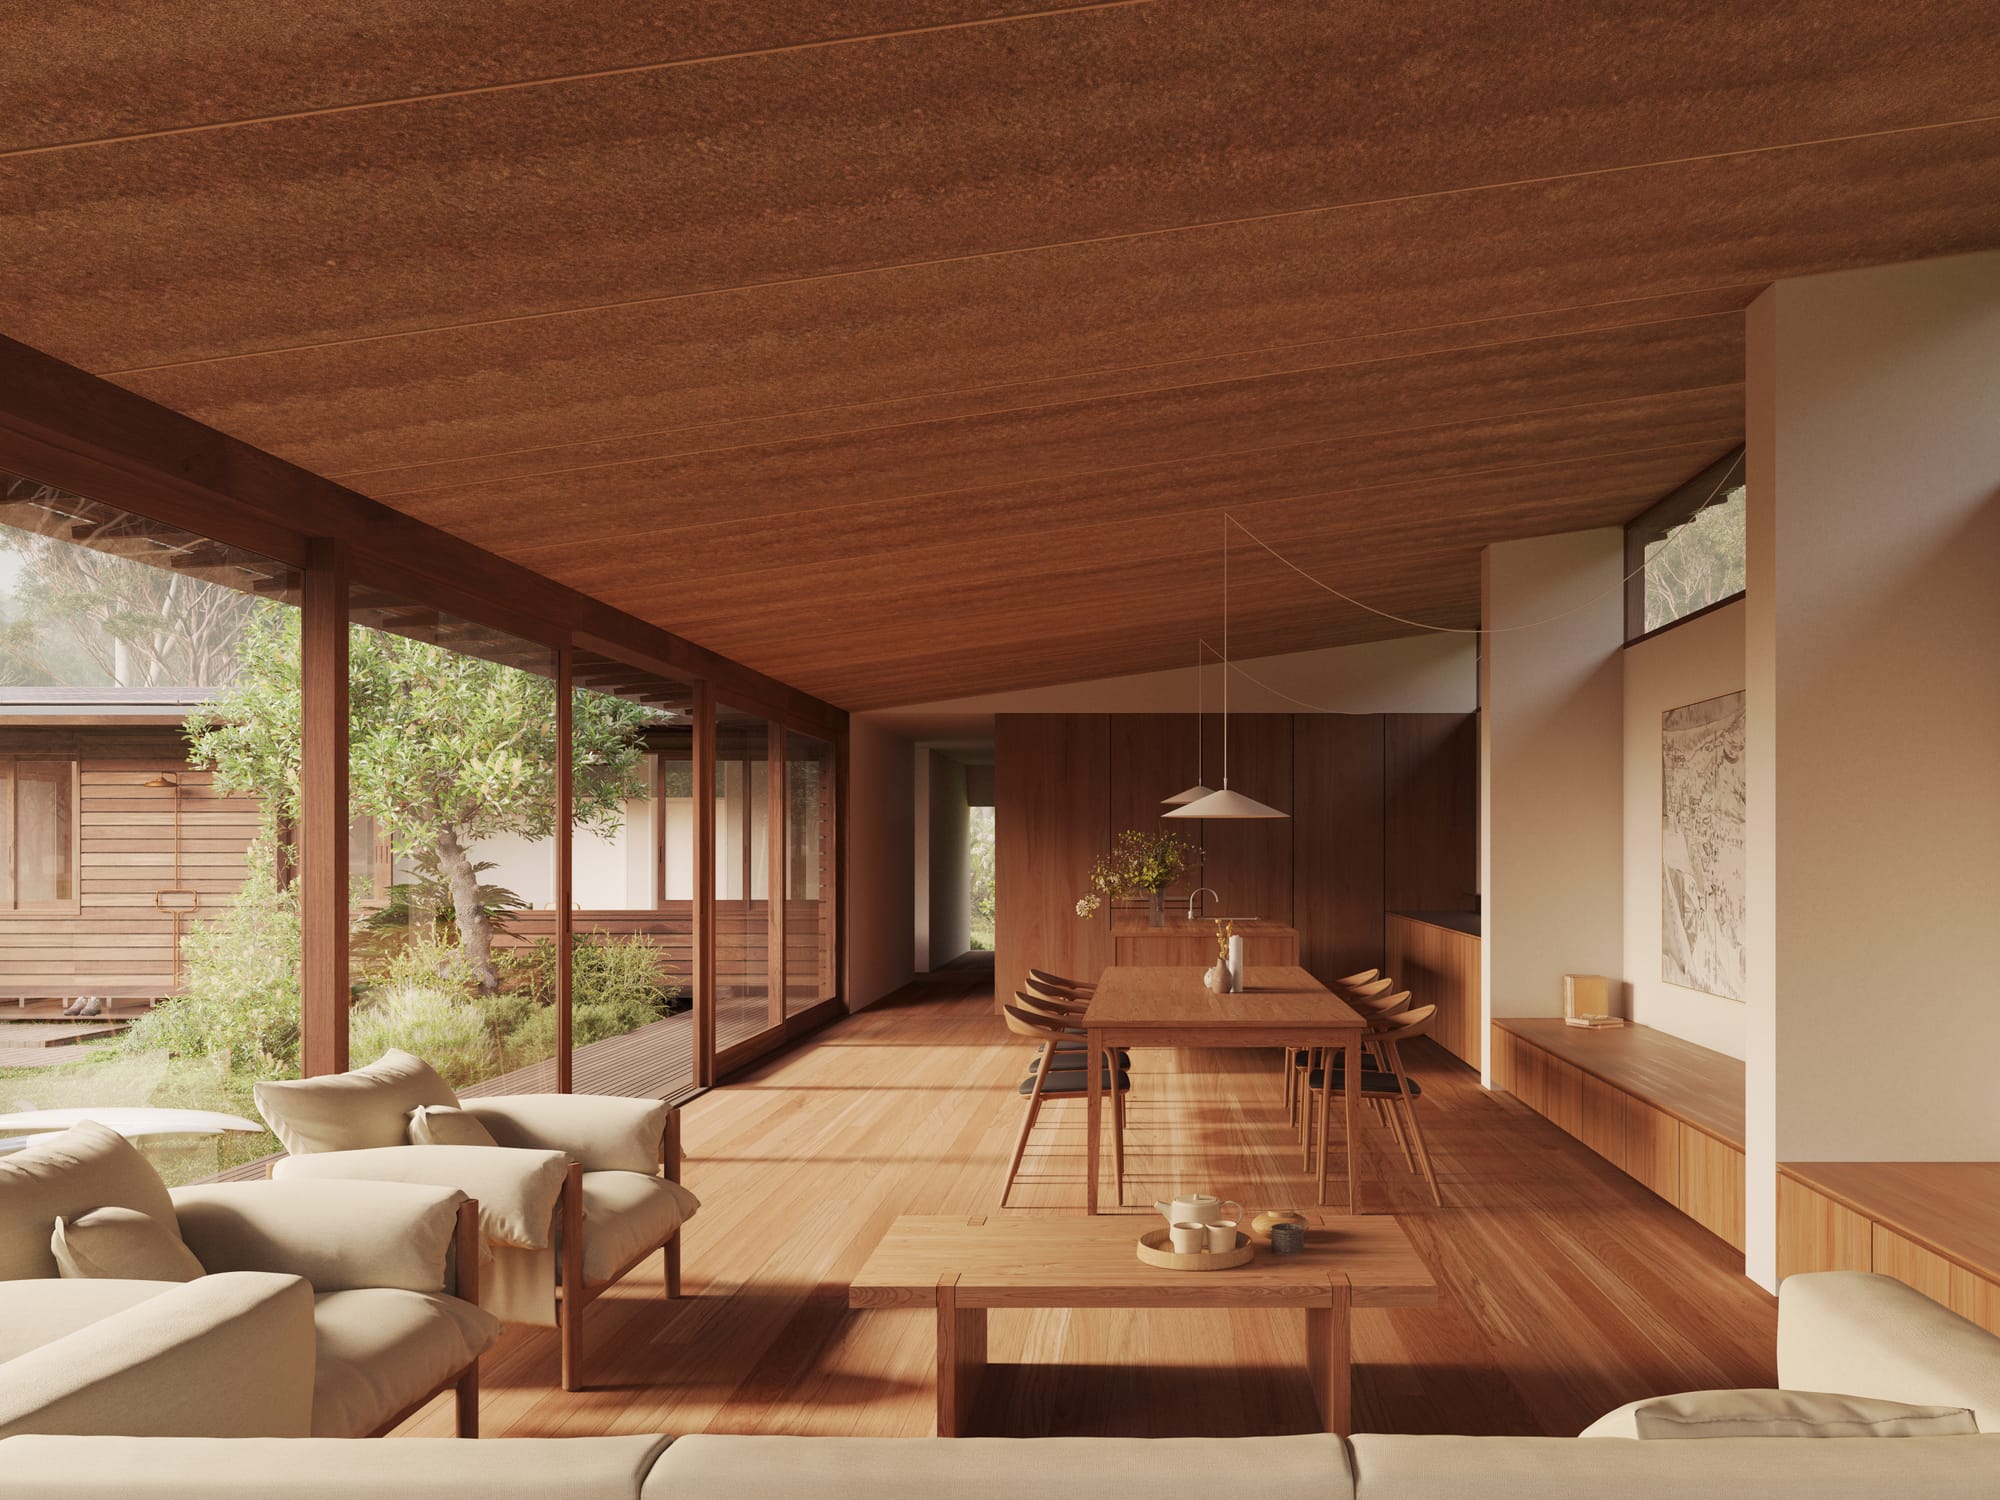 Corymbia House. Renders copyright of CHOIRENDER. Open plan living and dining space with angled timber veneer ceiling and timber floors. Full length sliding windows and windows open onto timber verandah and garden.